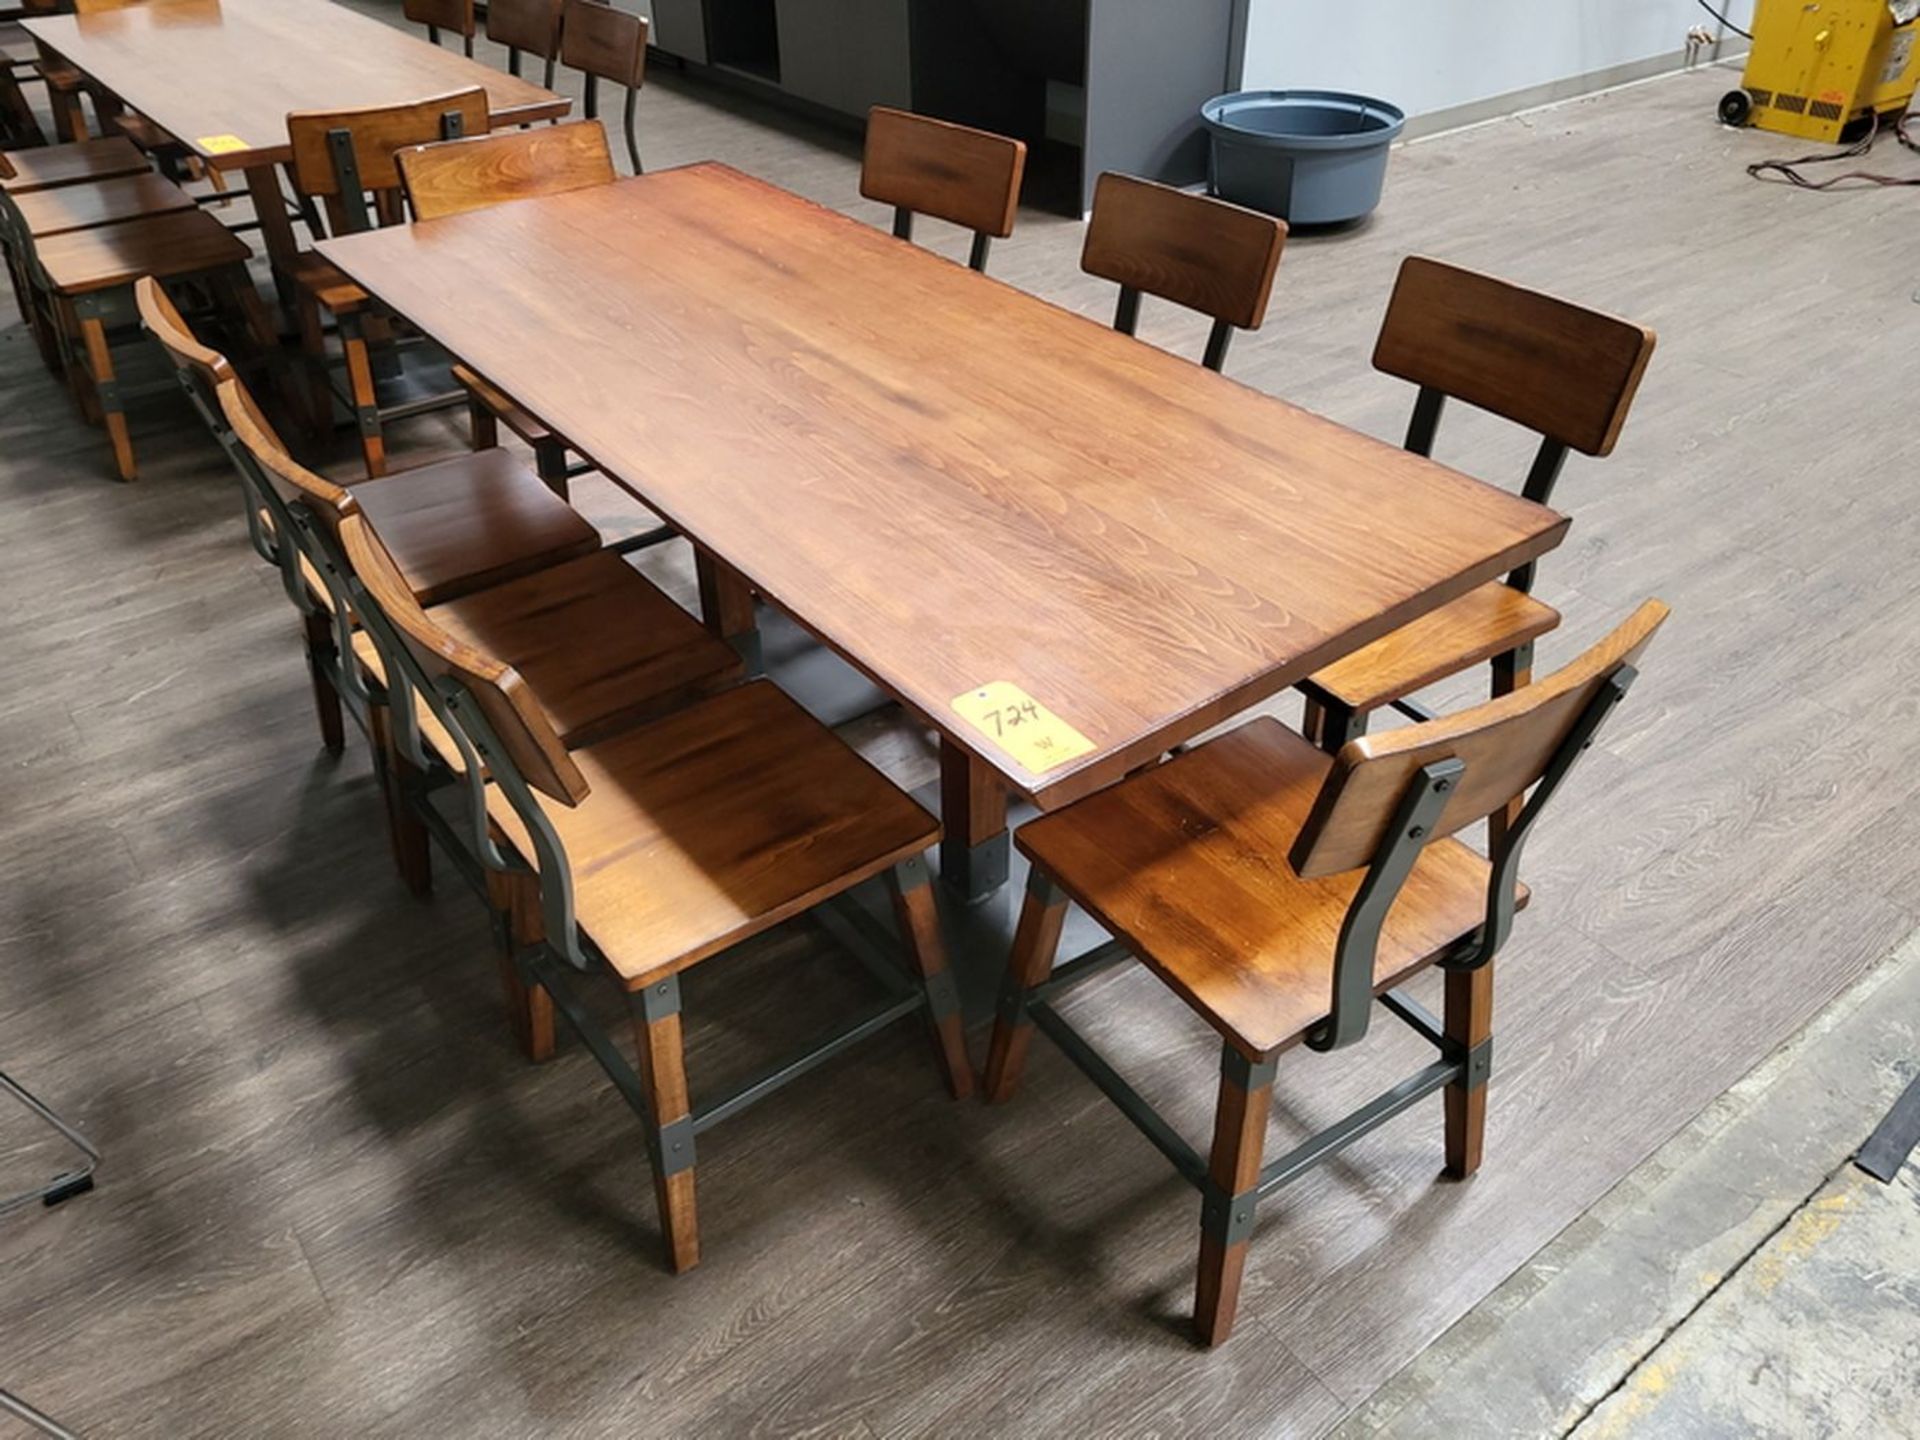 Wood Cafeteria Table; 29.5 in. x 72 in., Includes (8) Matching Chairs